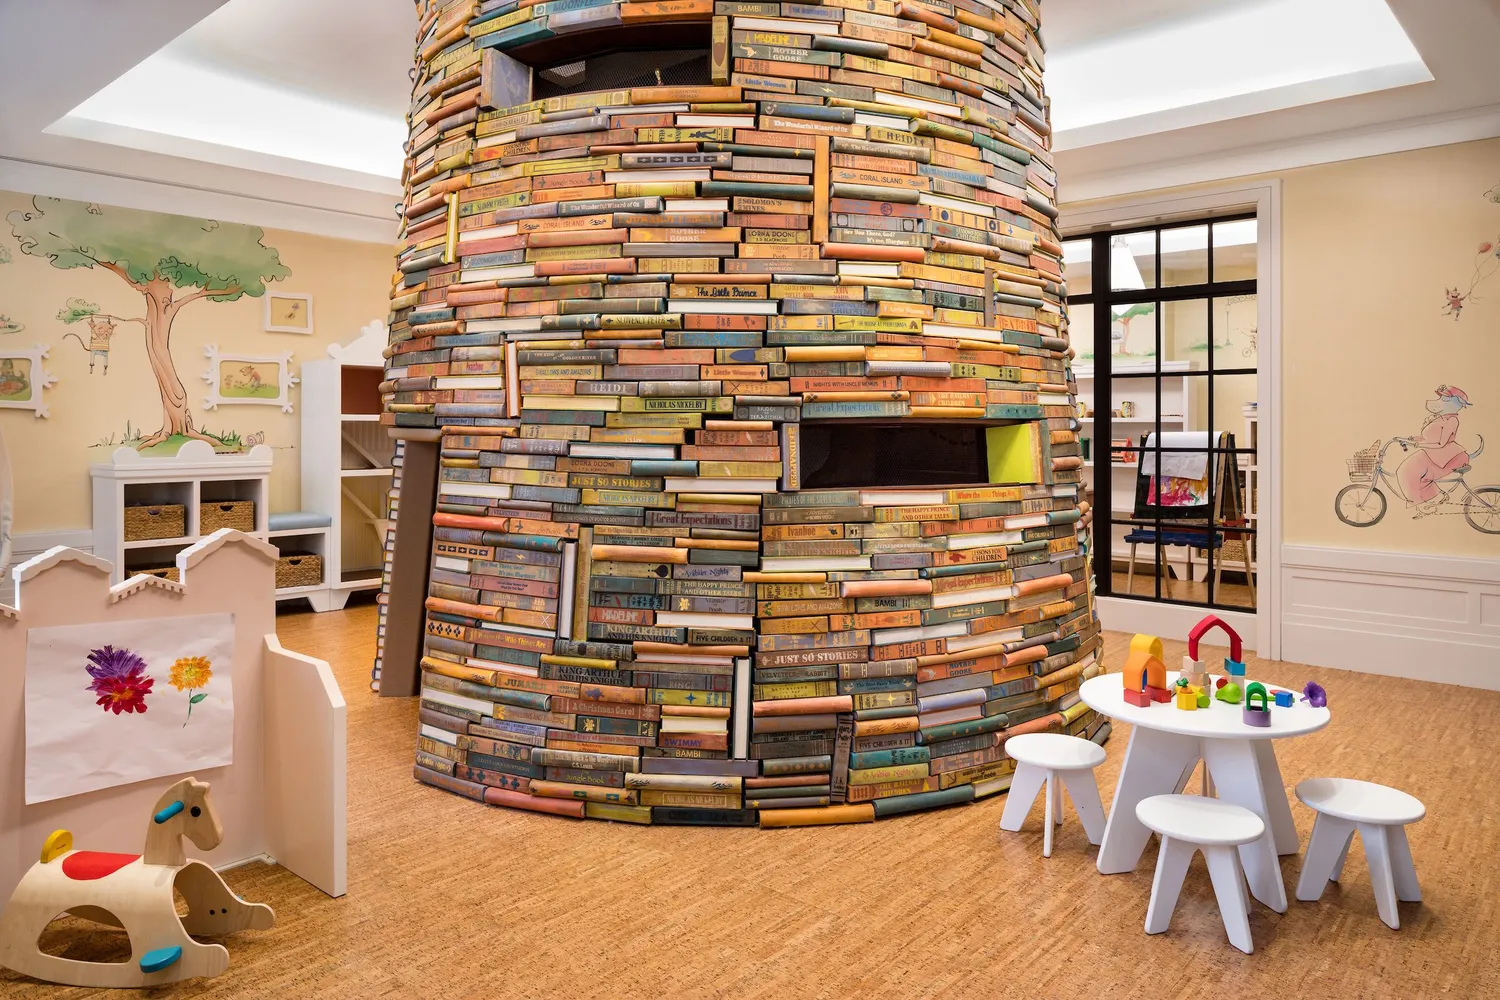 Children's playroom designed by Roto 